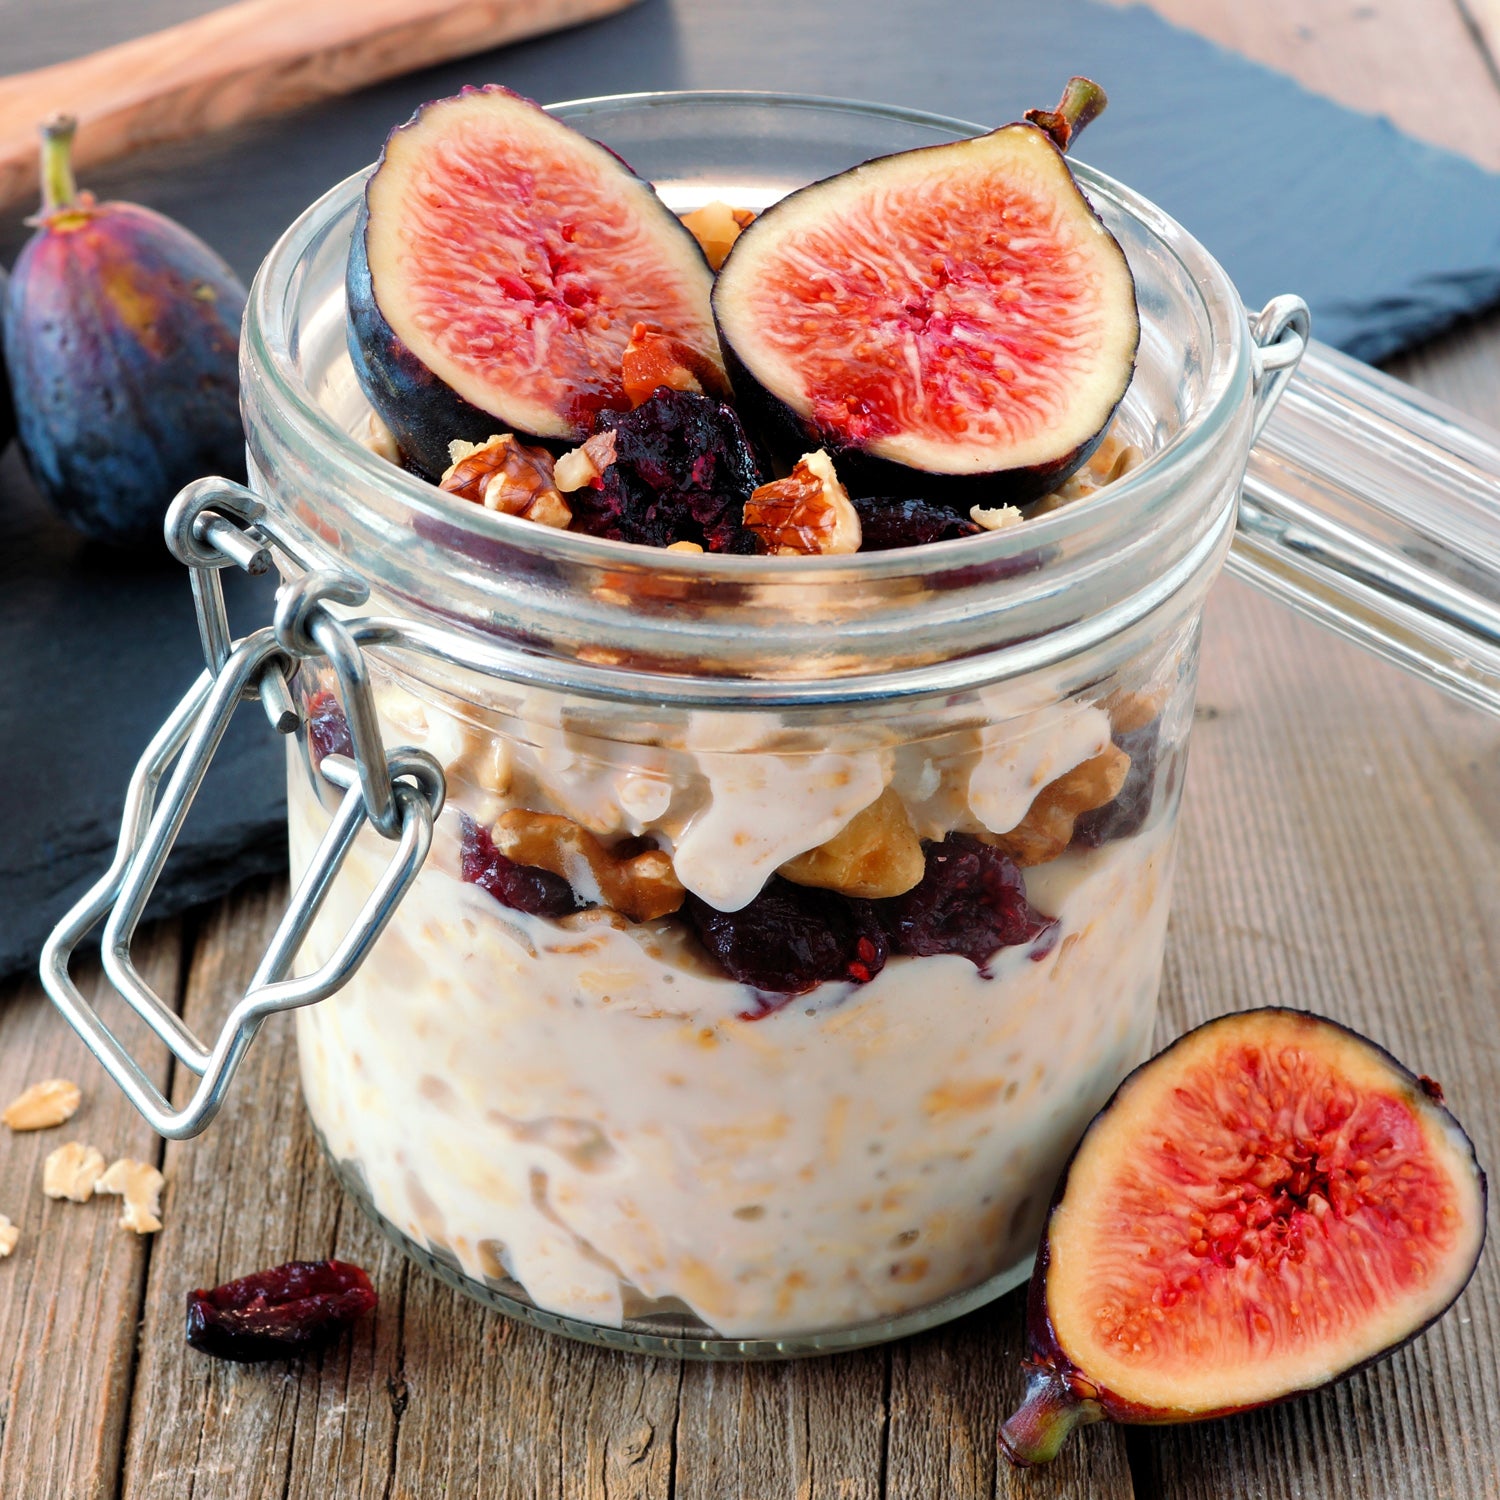 5 Overnight Oat Recipes To Fuel Performance